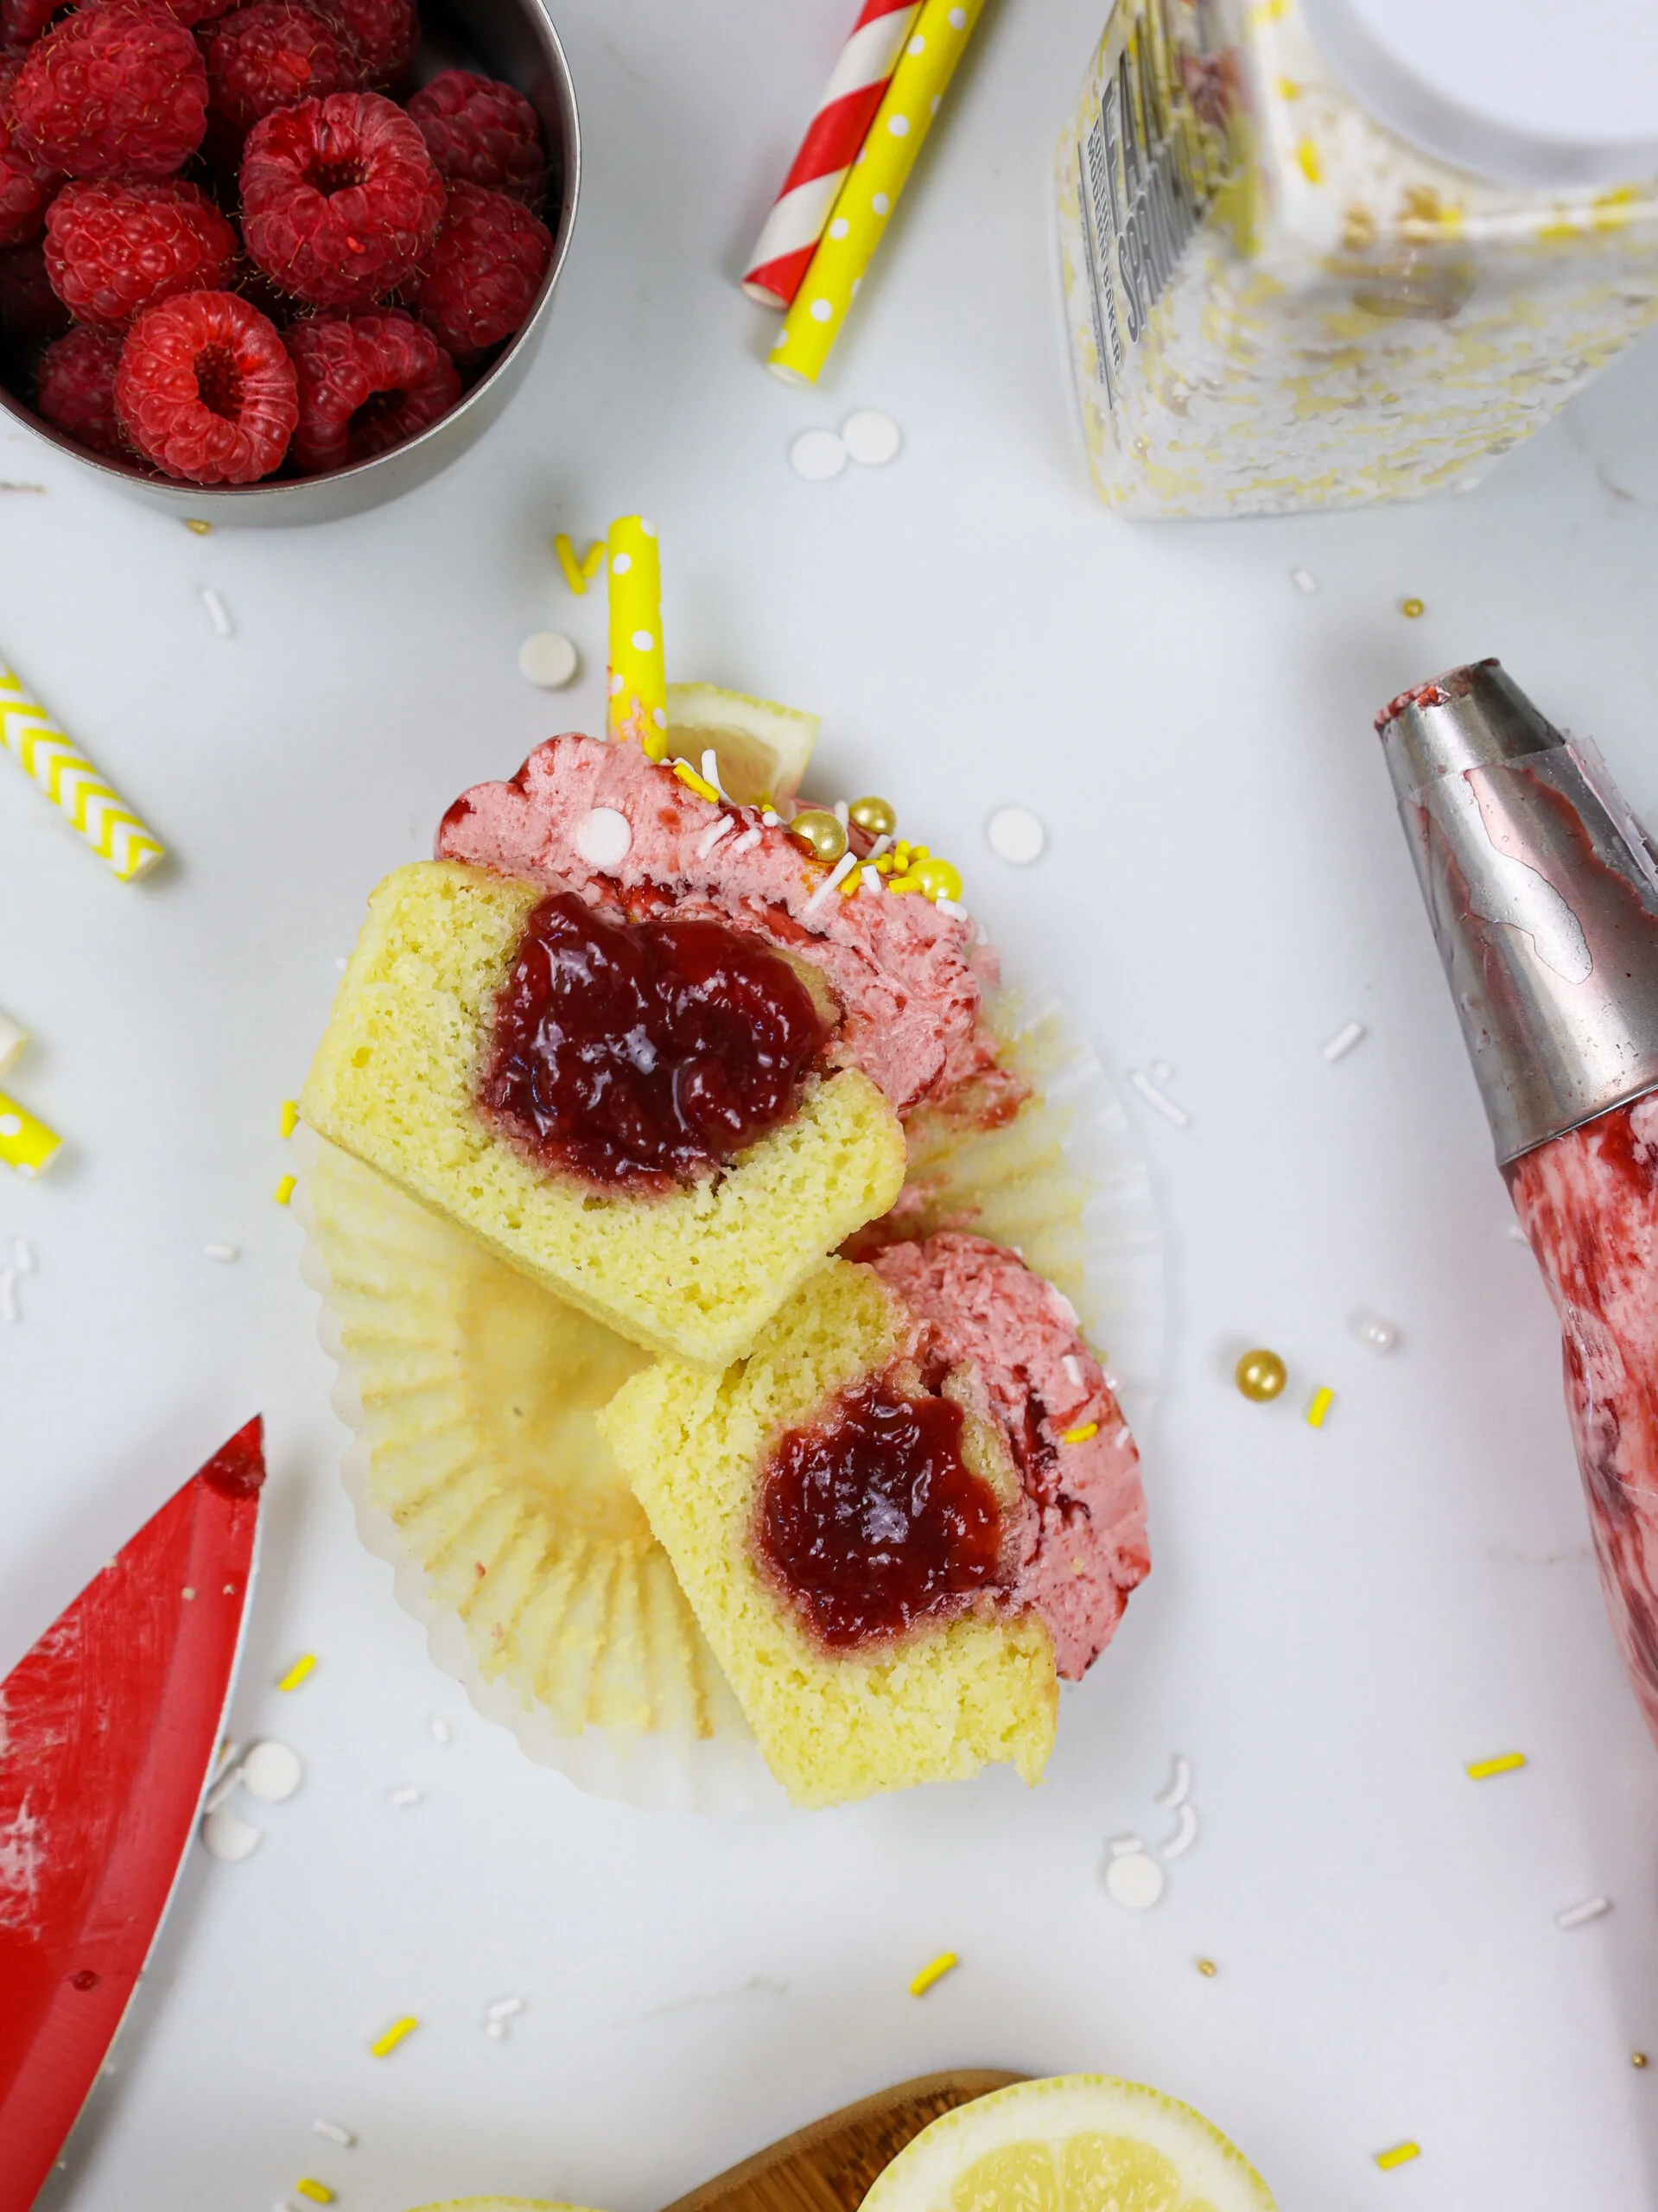 image of a raspberry lemonade cupcake cut open to show it's raspberry filling